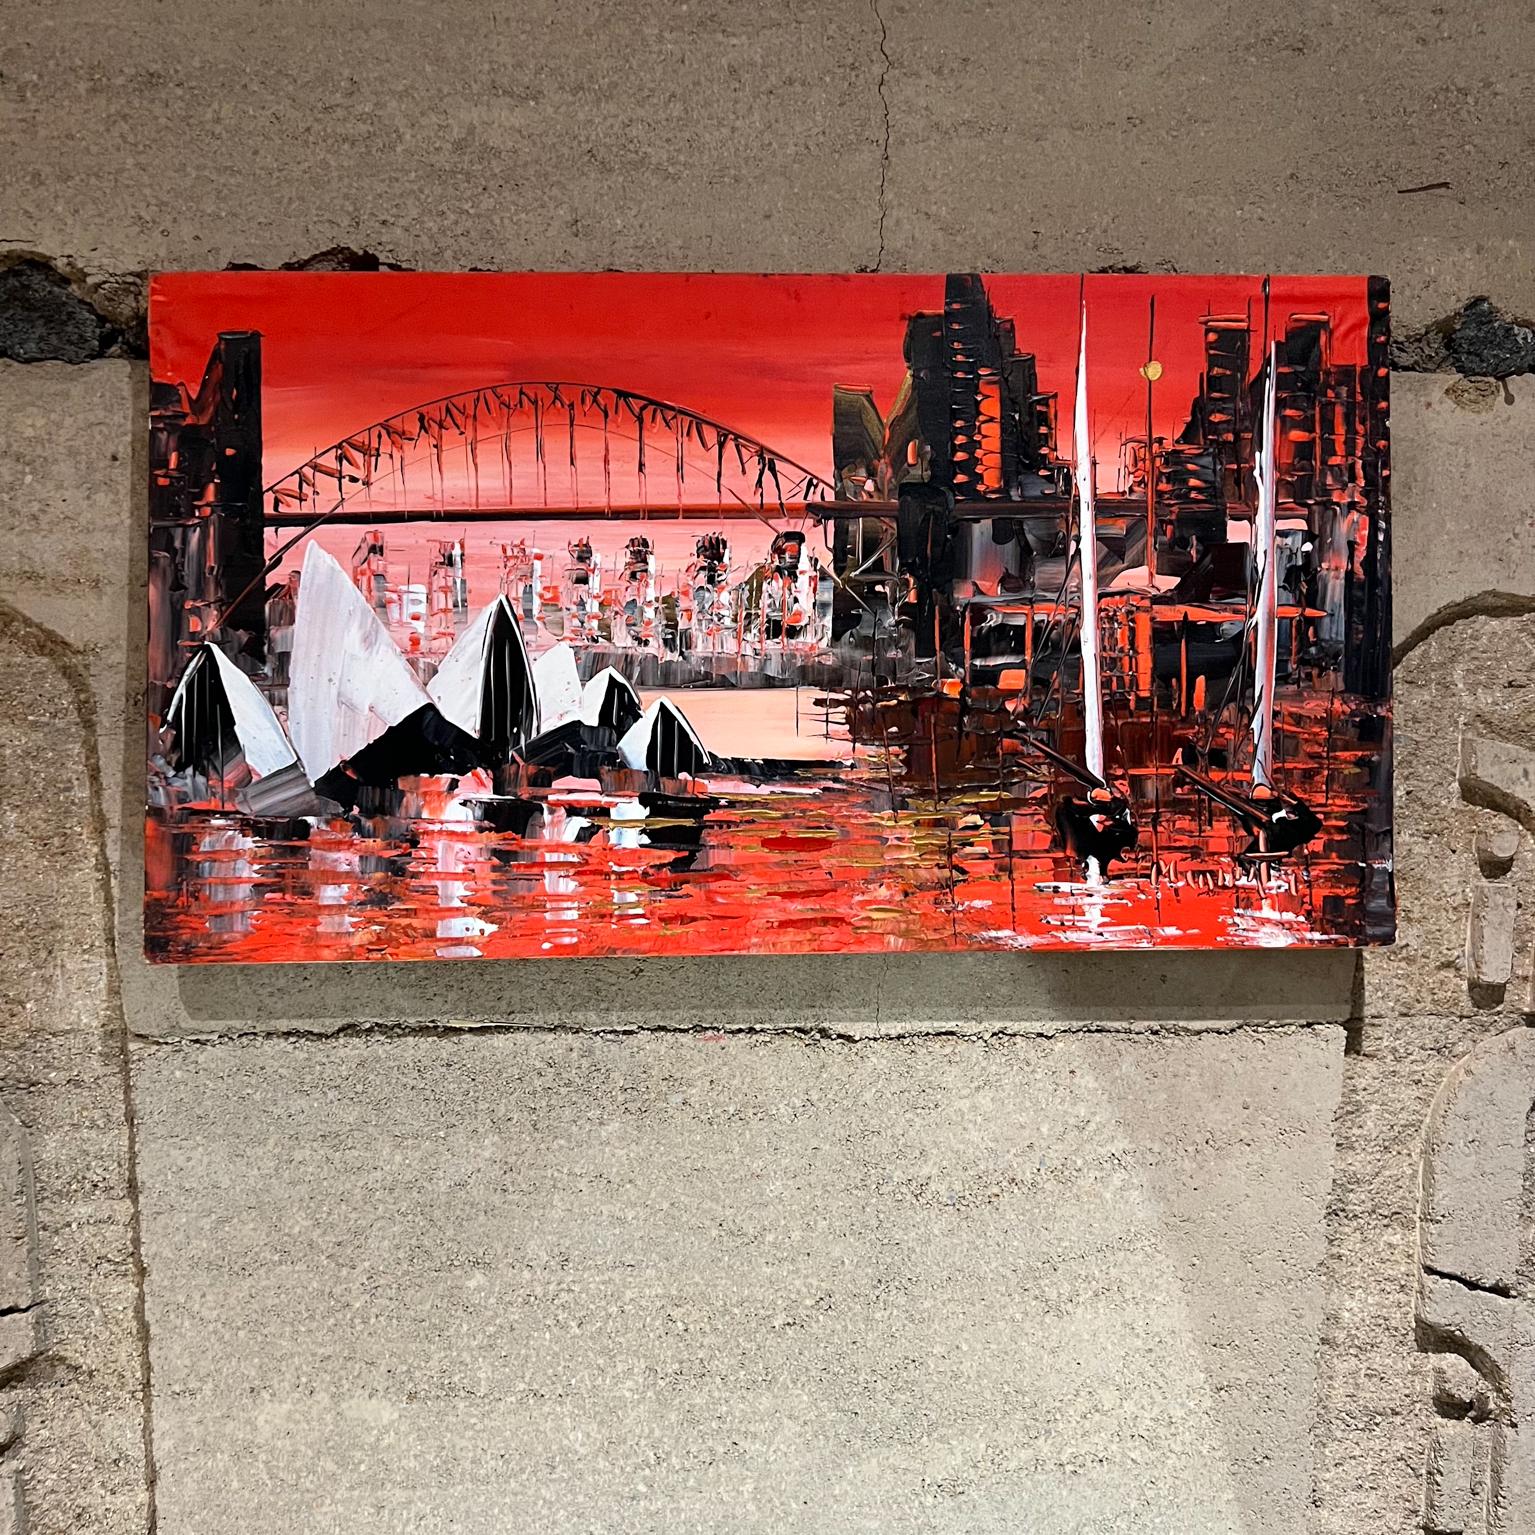 Vivid Color Sydney AU Cityscape oil painting artwork by Mark Kasav
Measures: 18 tall x 33 wide x .75 deep
Oil on Canvas
Canadian artist Mark Kazav
Original vintage condition.
Refer to images provided.